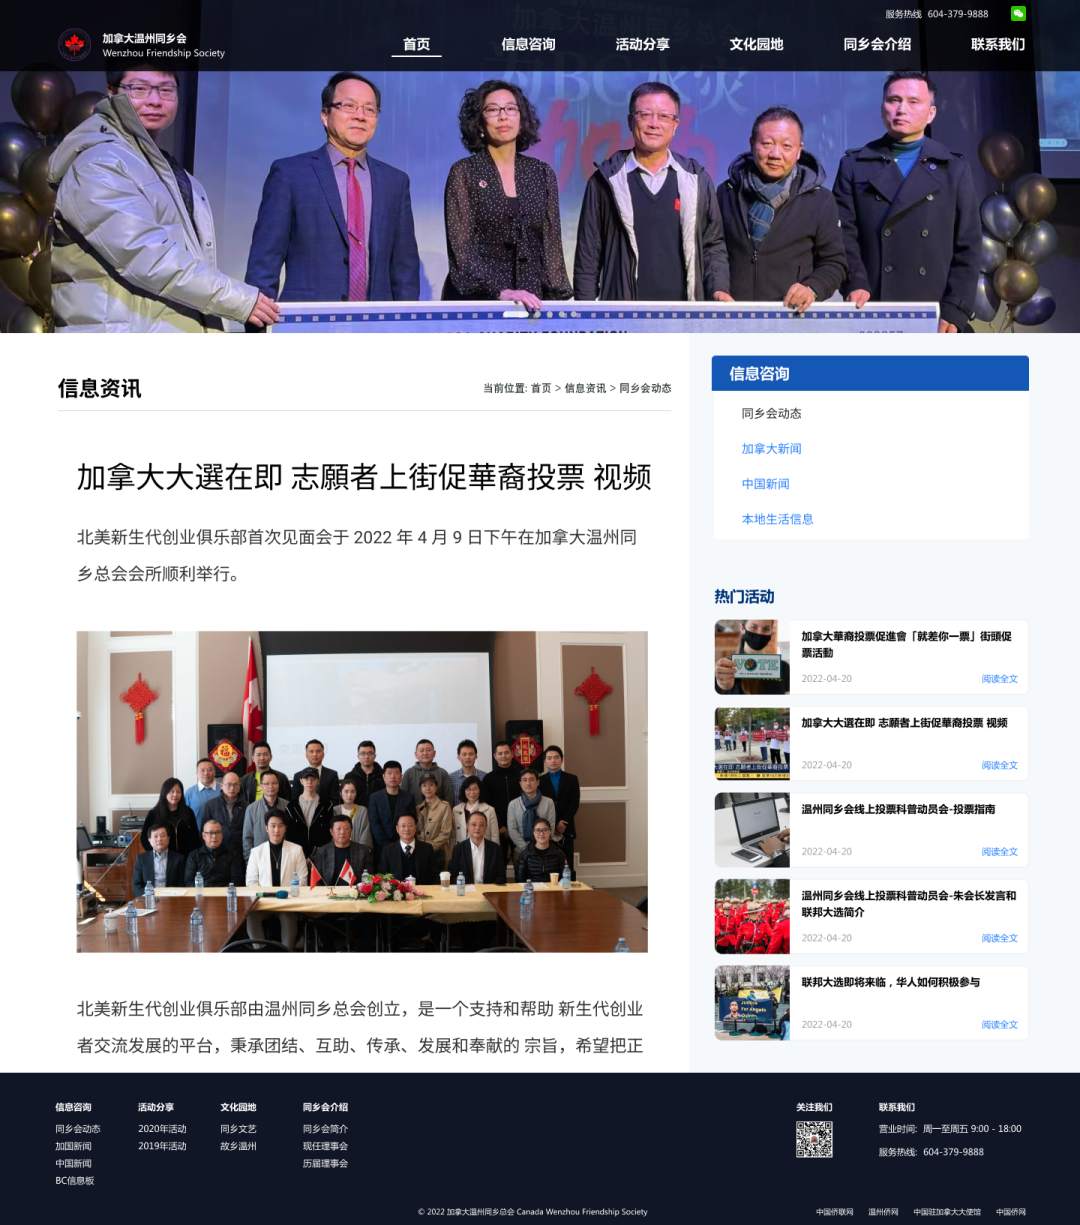 Cover Image for Wenzhou Friendship Community 